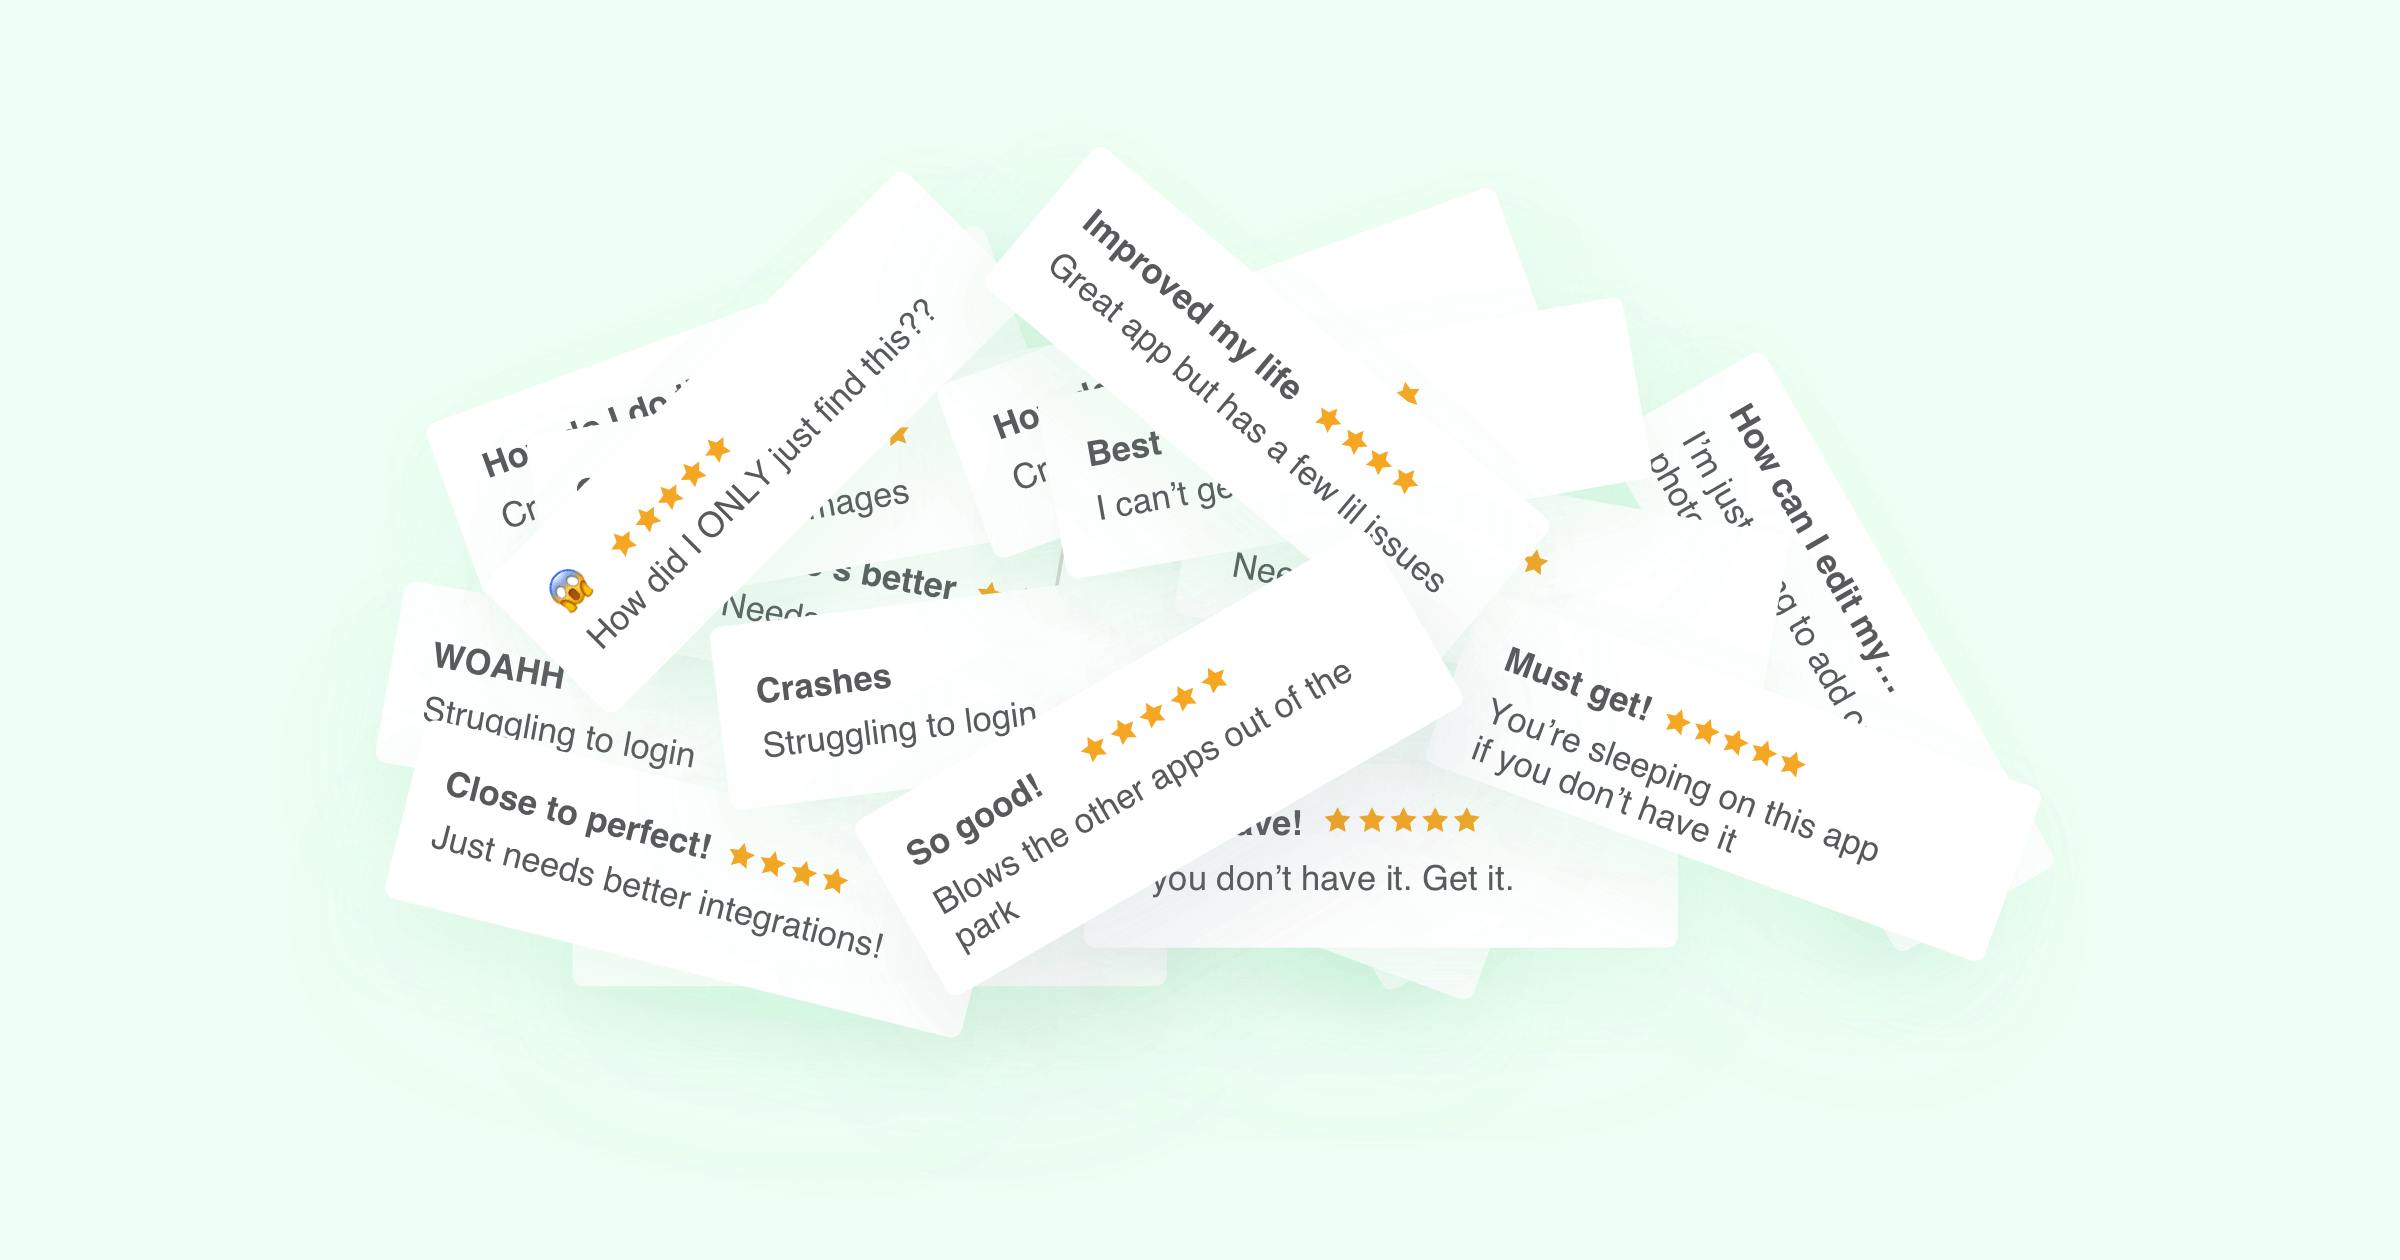 10 ways to get more & better reviews for your app